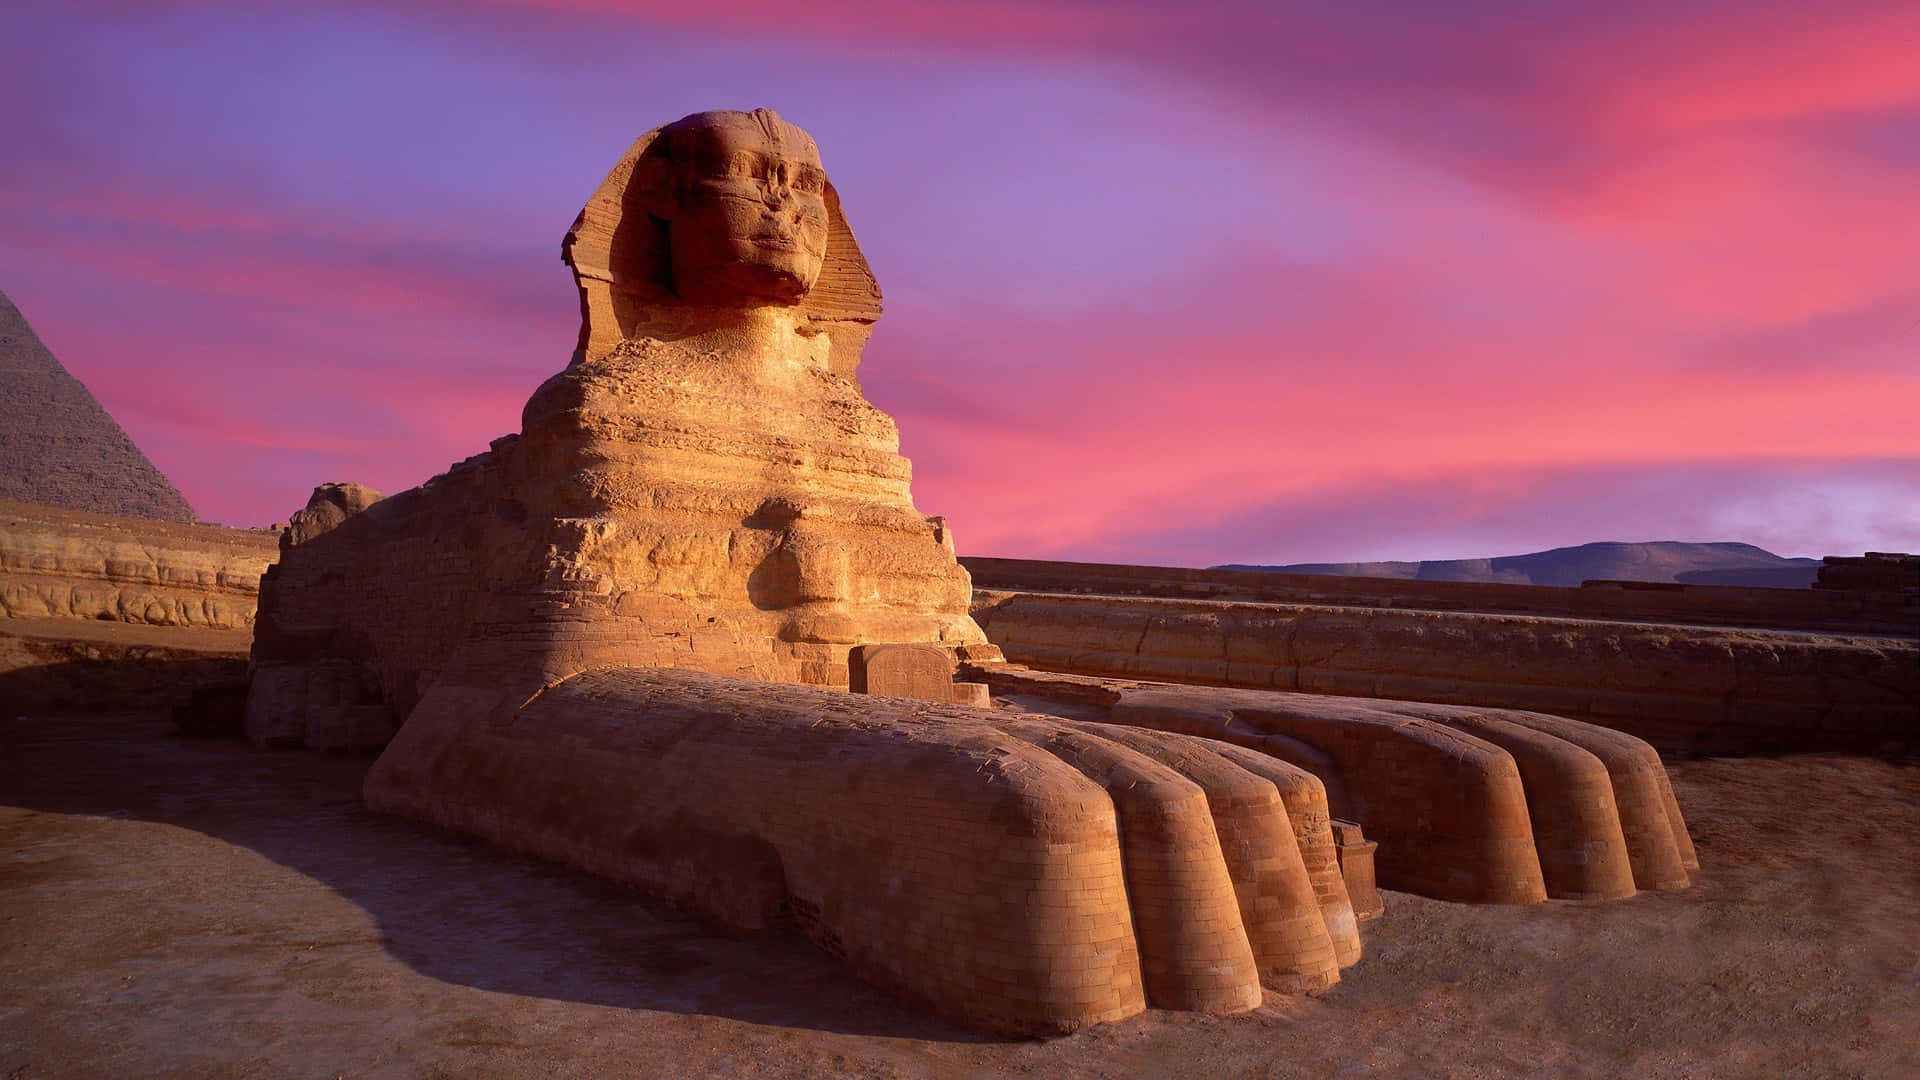 A Sphinx And Pyramids At Sunset